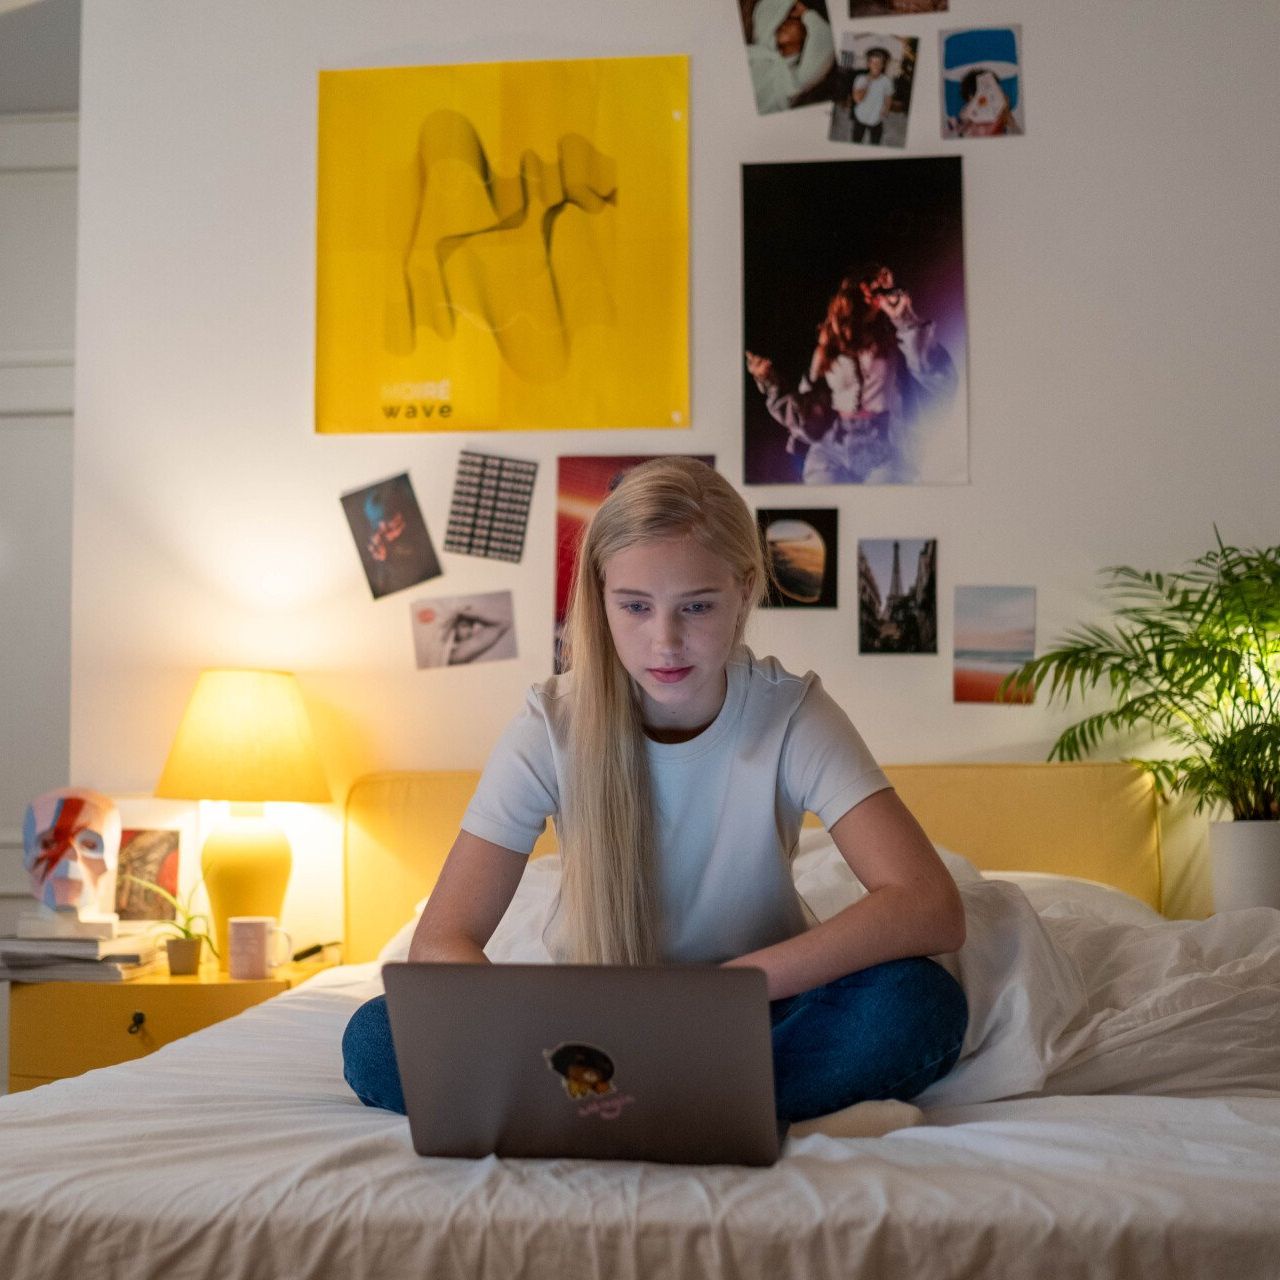 a girl is sitting on a bed using a laptop computer